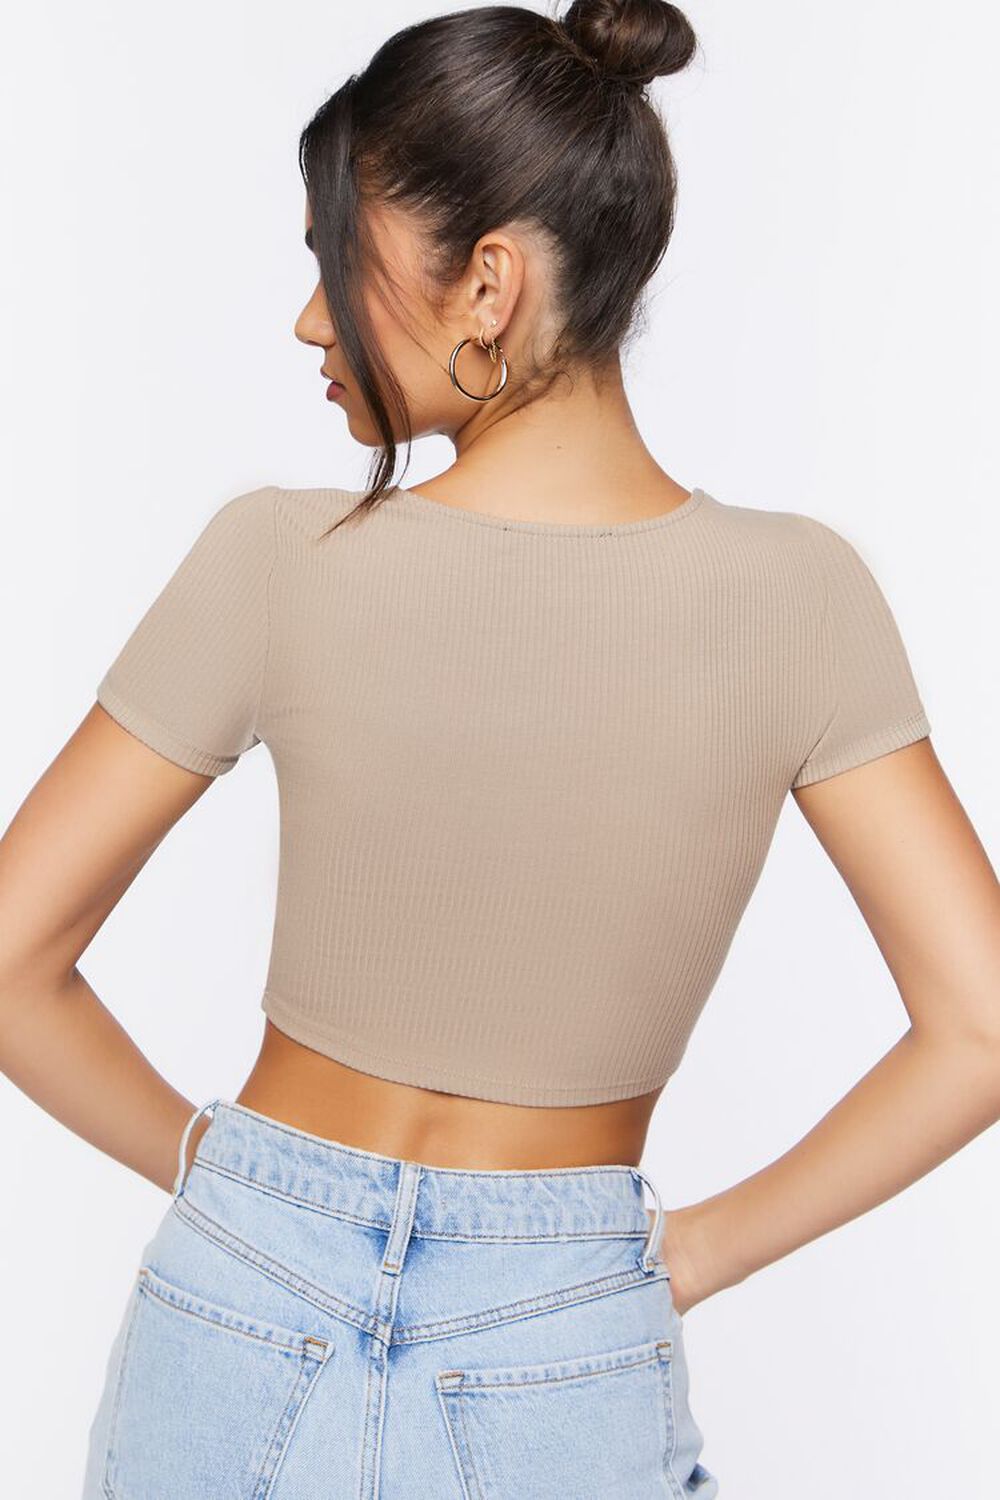 Ruched Rib-Knit Crop Top, image 3